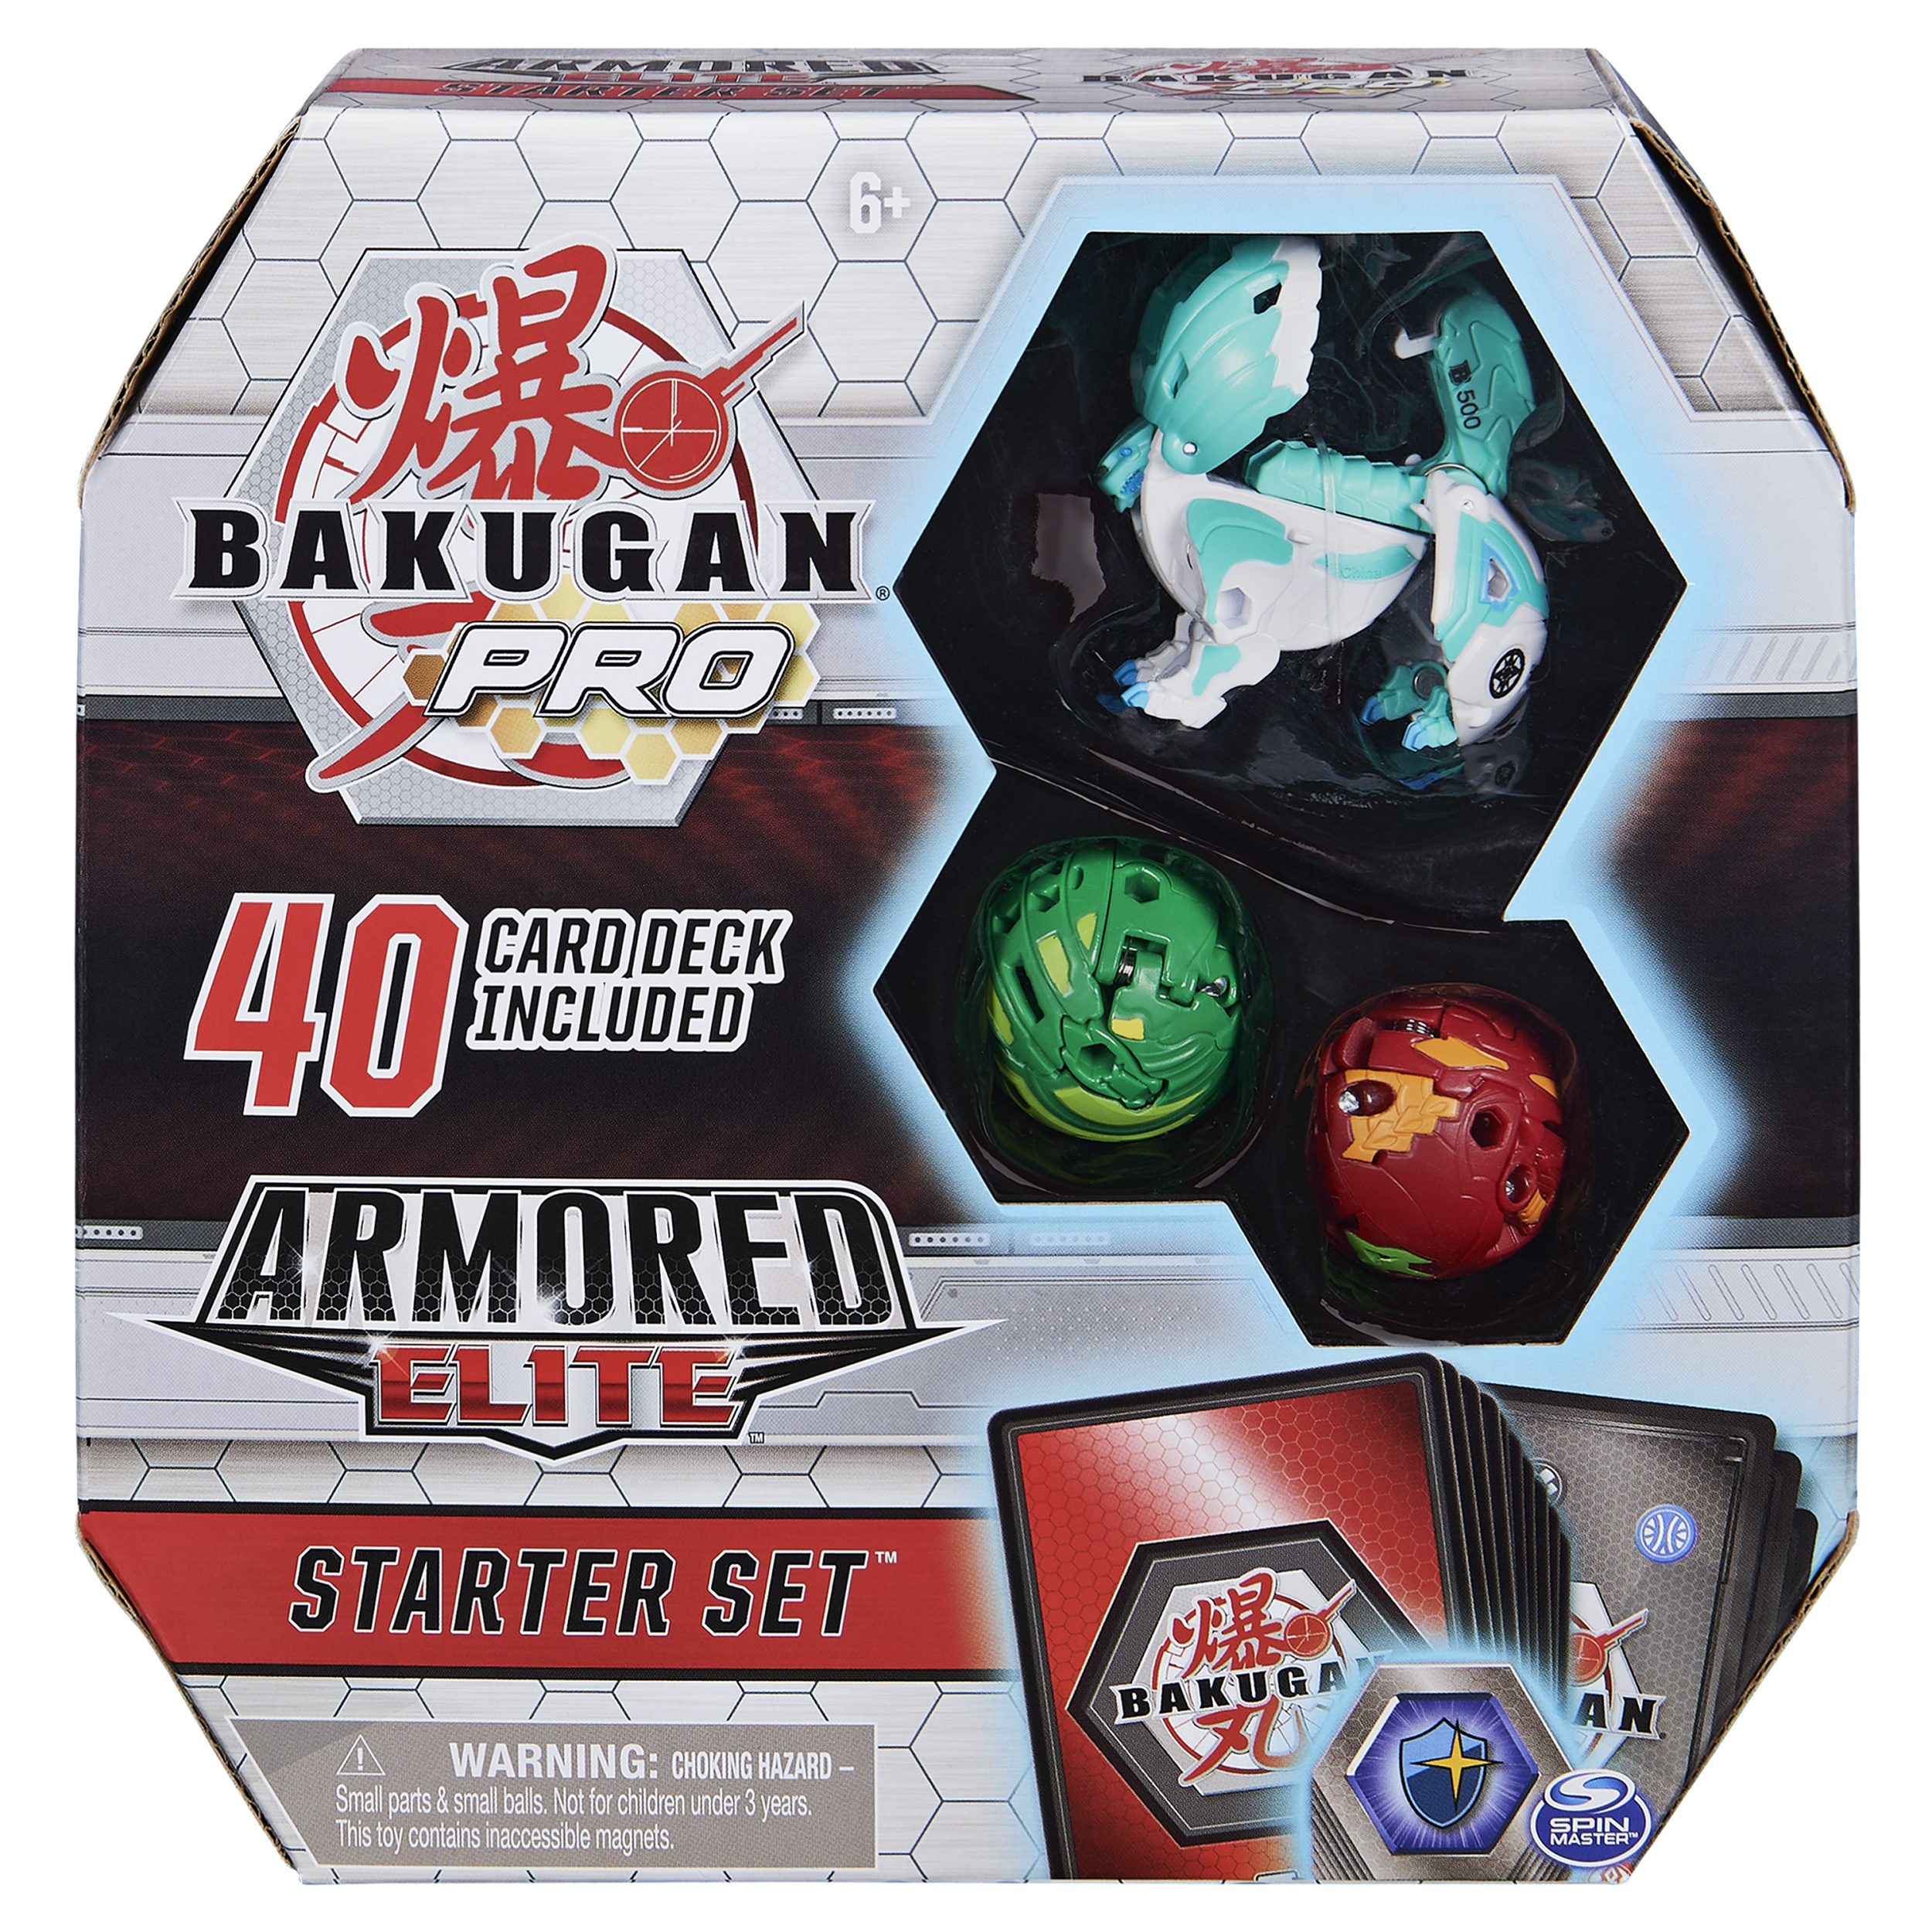 Bakugan Pro, Armored Elite Starter Set with Hydorous Ultra, 2 Bakugan and Collectible Trading Cards - image 1 of 5